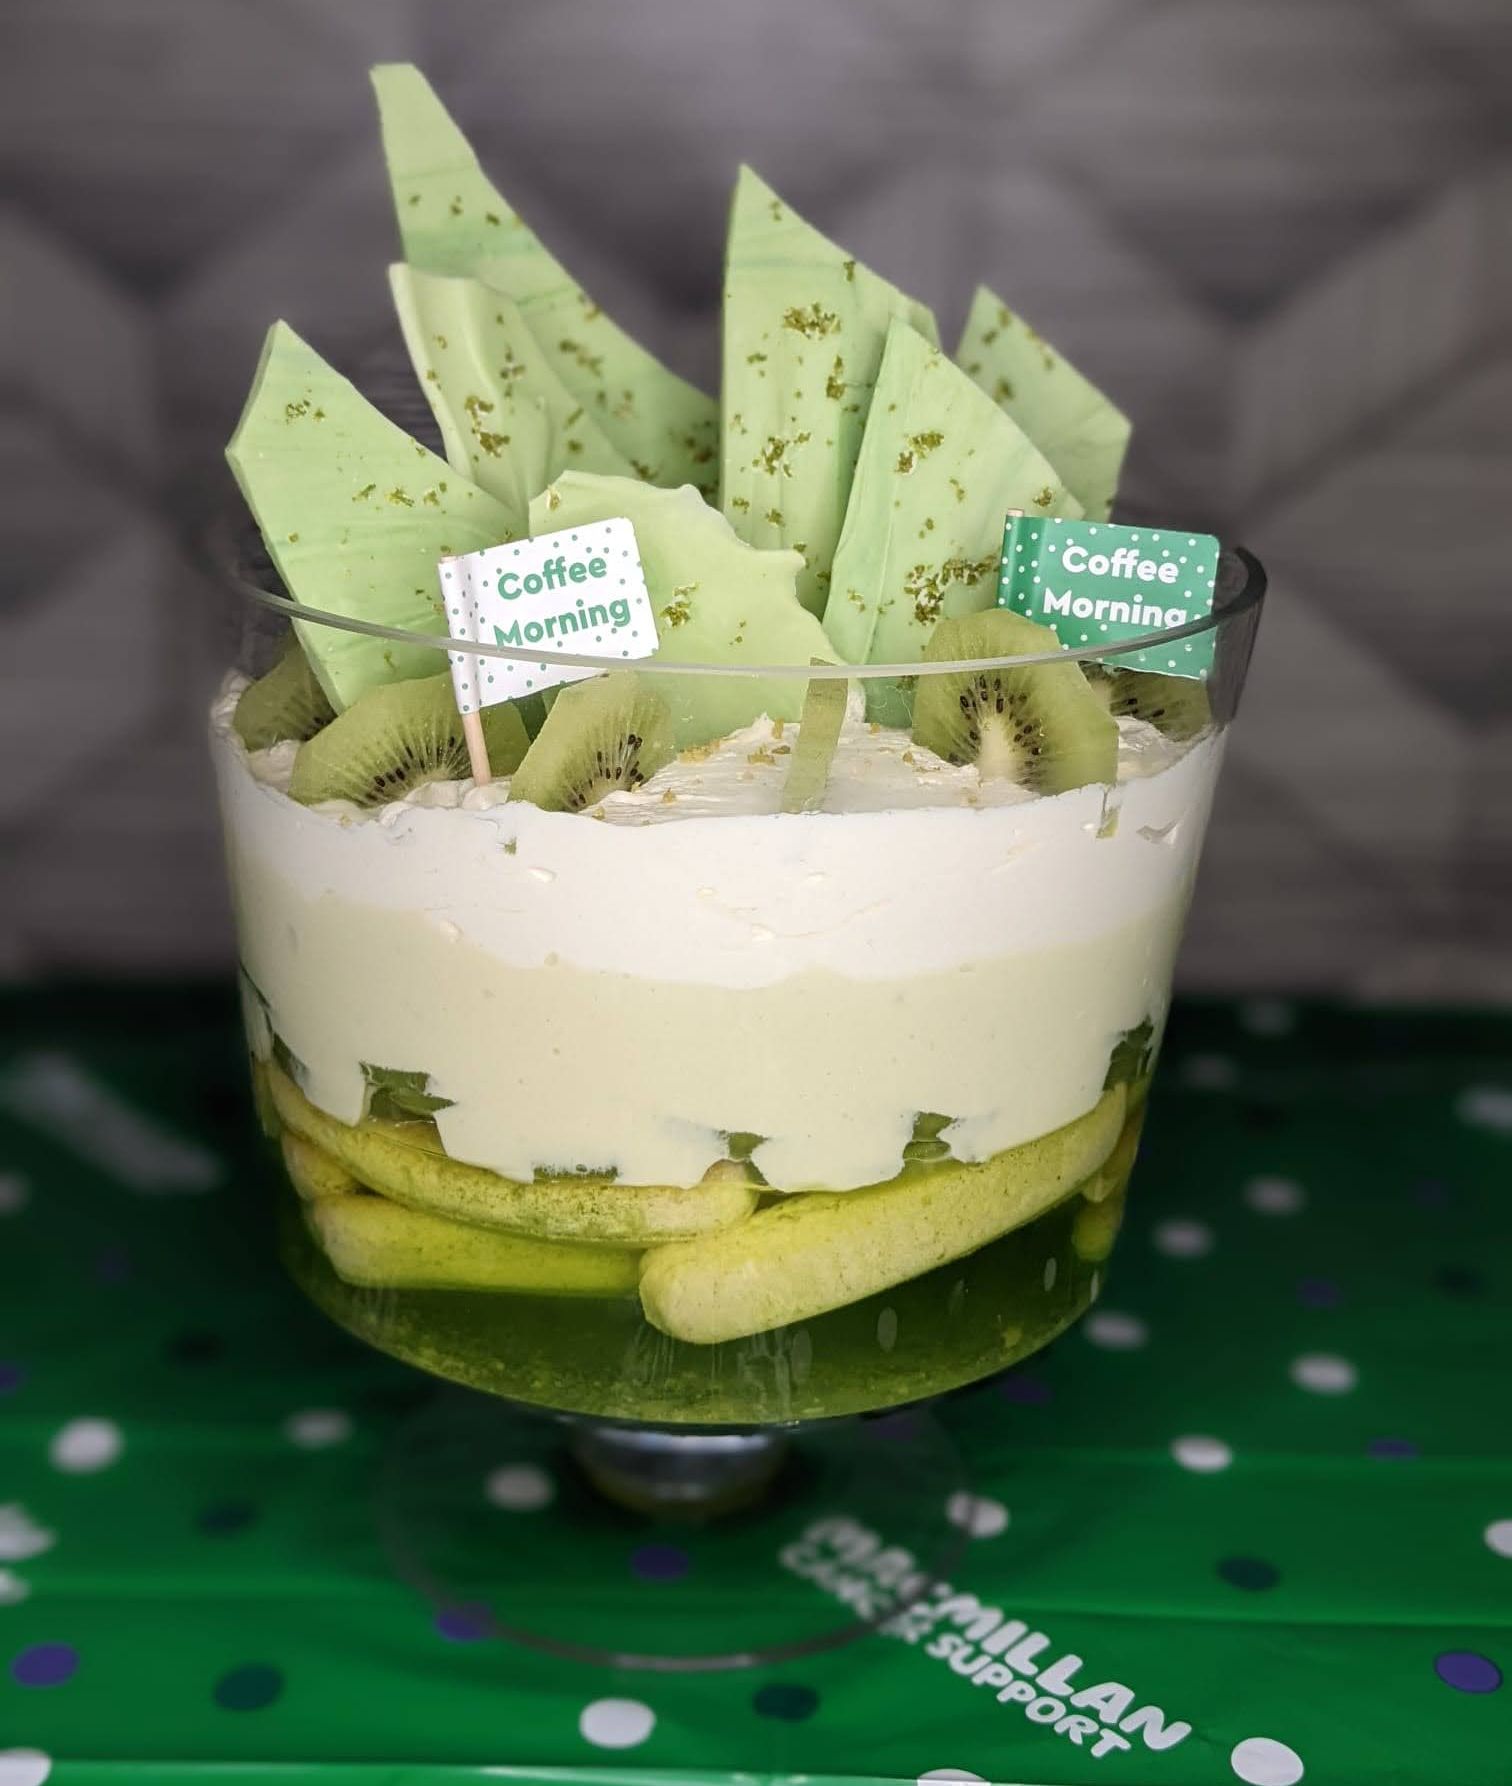 Southport celebrity baker Jemma Melvin has created a special trifle recipe to celebrate the 2022 Macmillan Coffee Morning